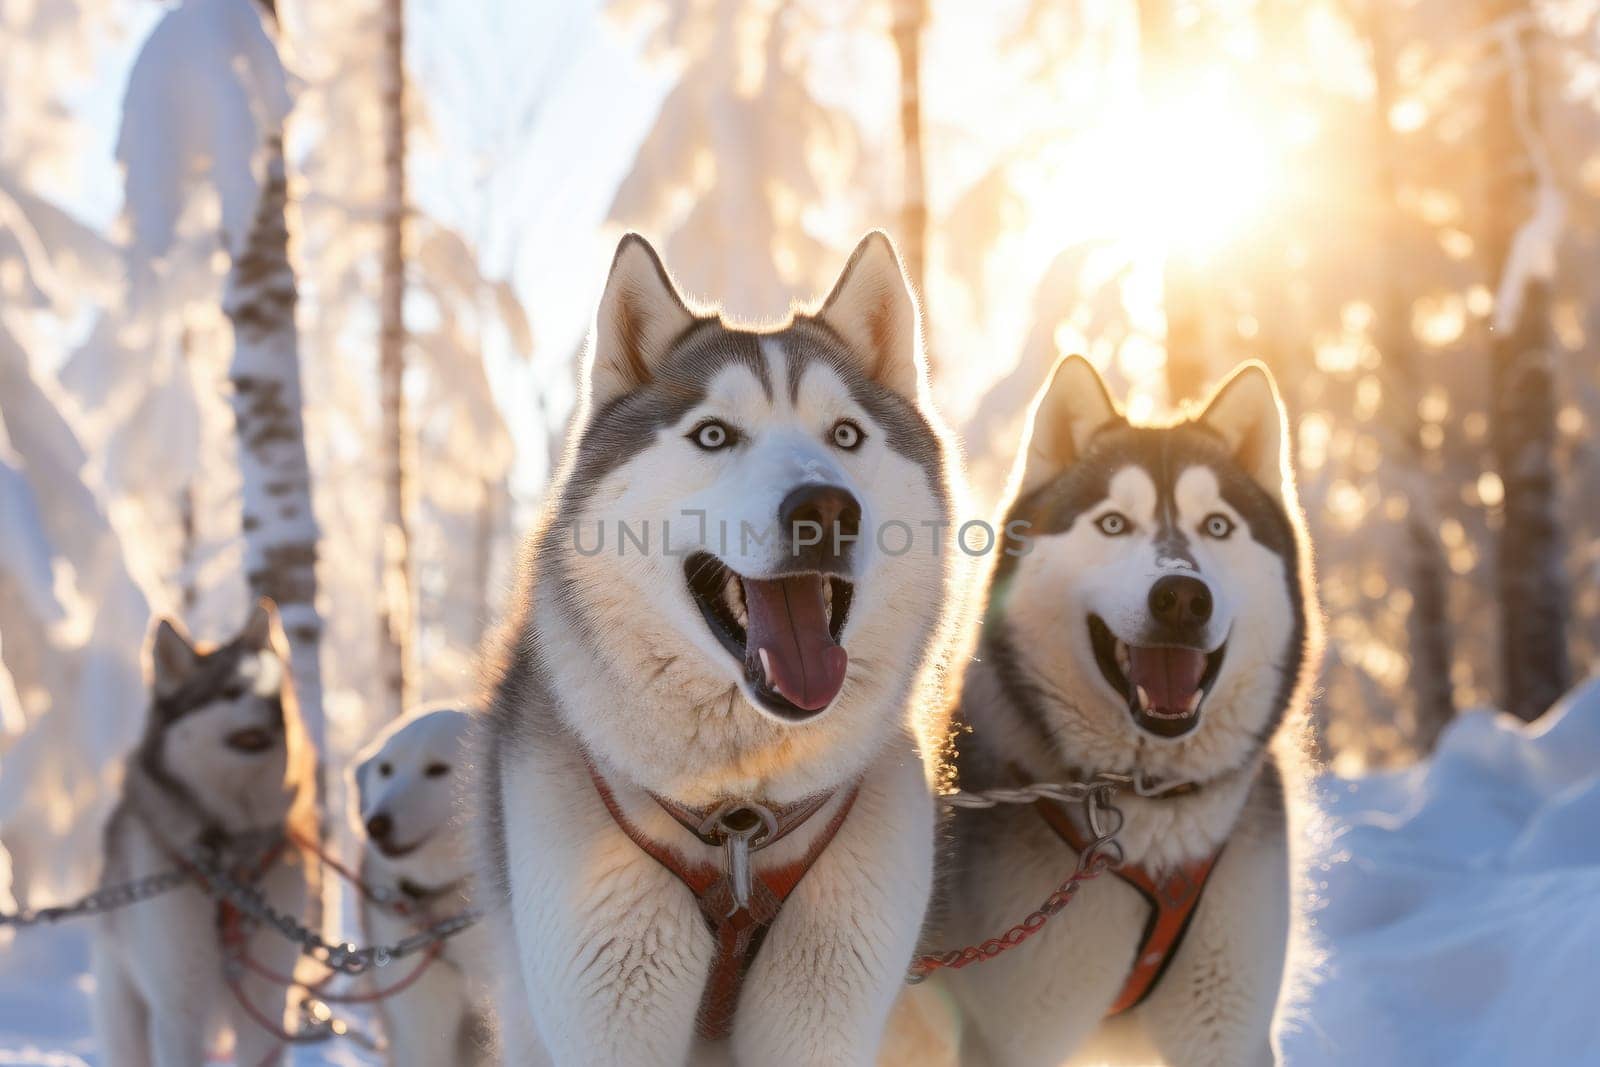 A dog sledding adventure in a snowy forest for lovers of winter beauty by Yurich32